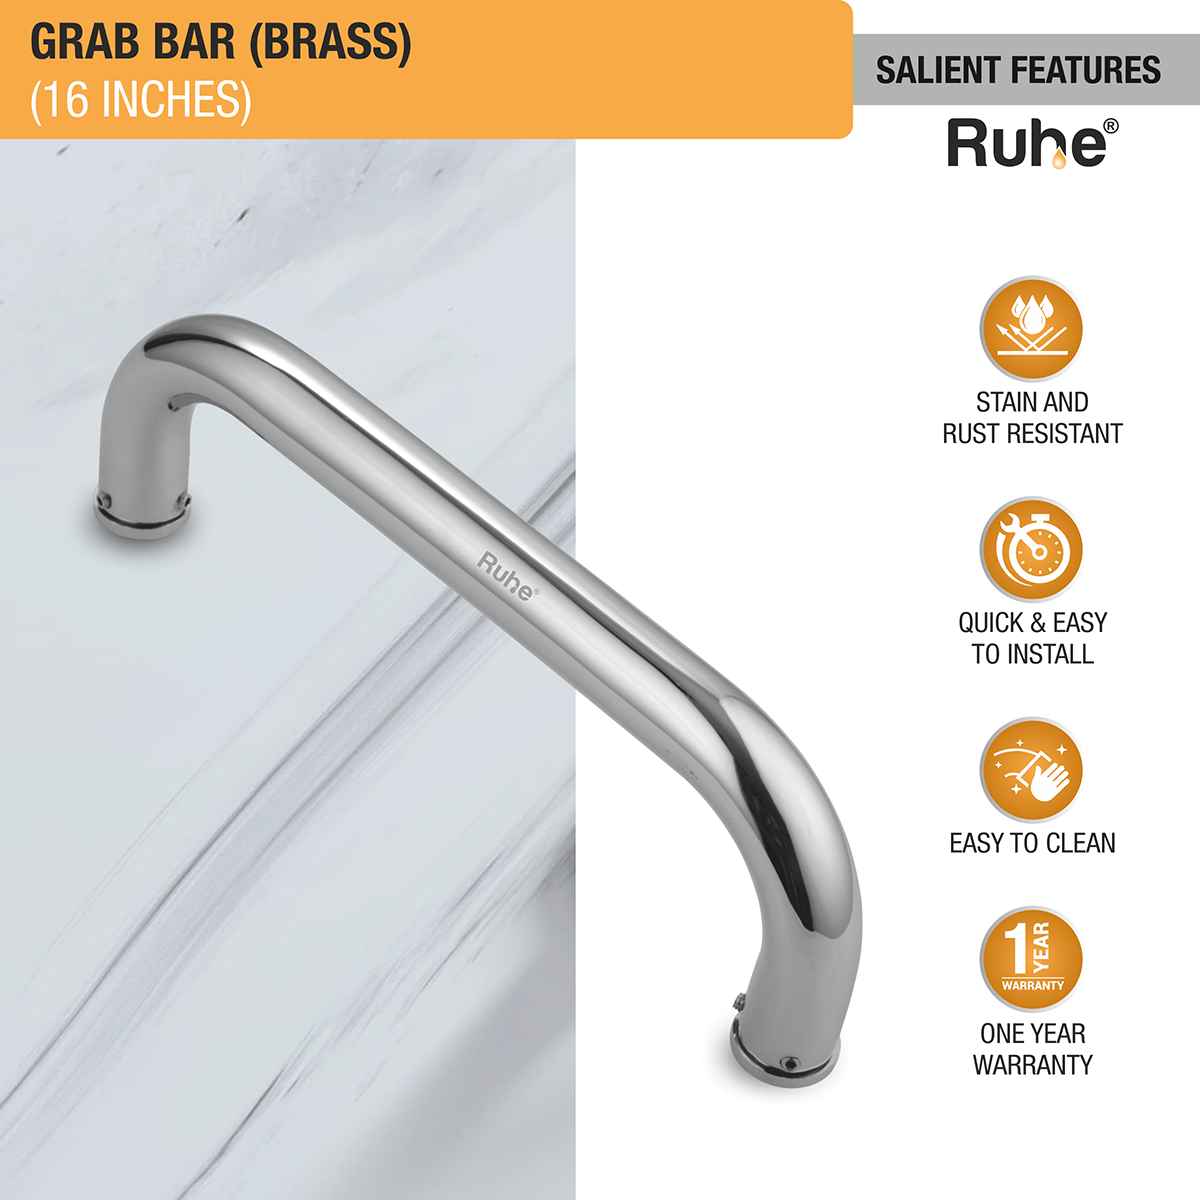 Brass Grab Bar (16 inches) features and benefits